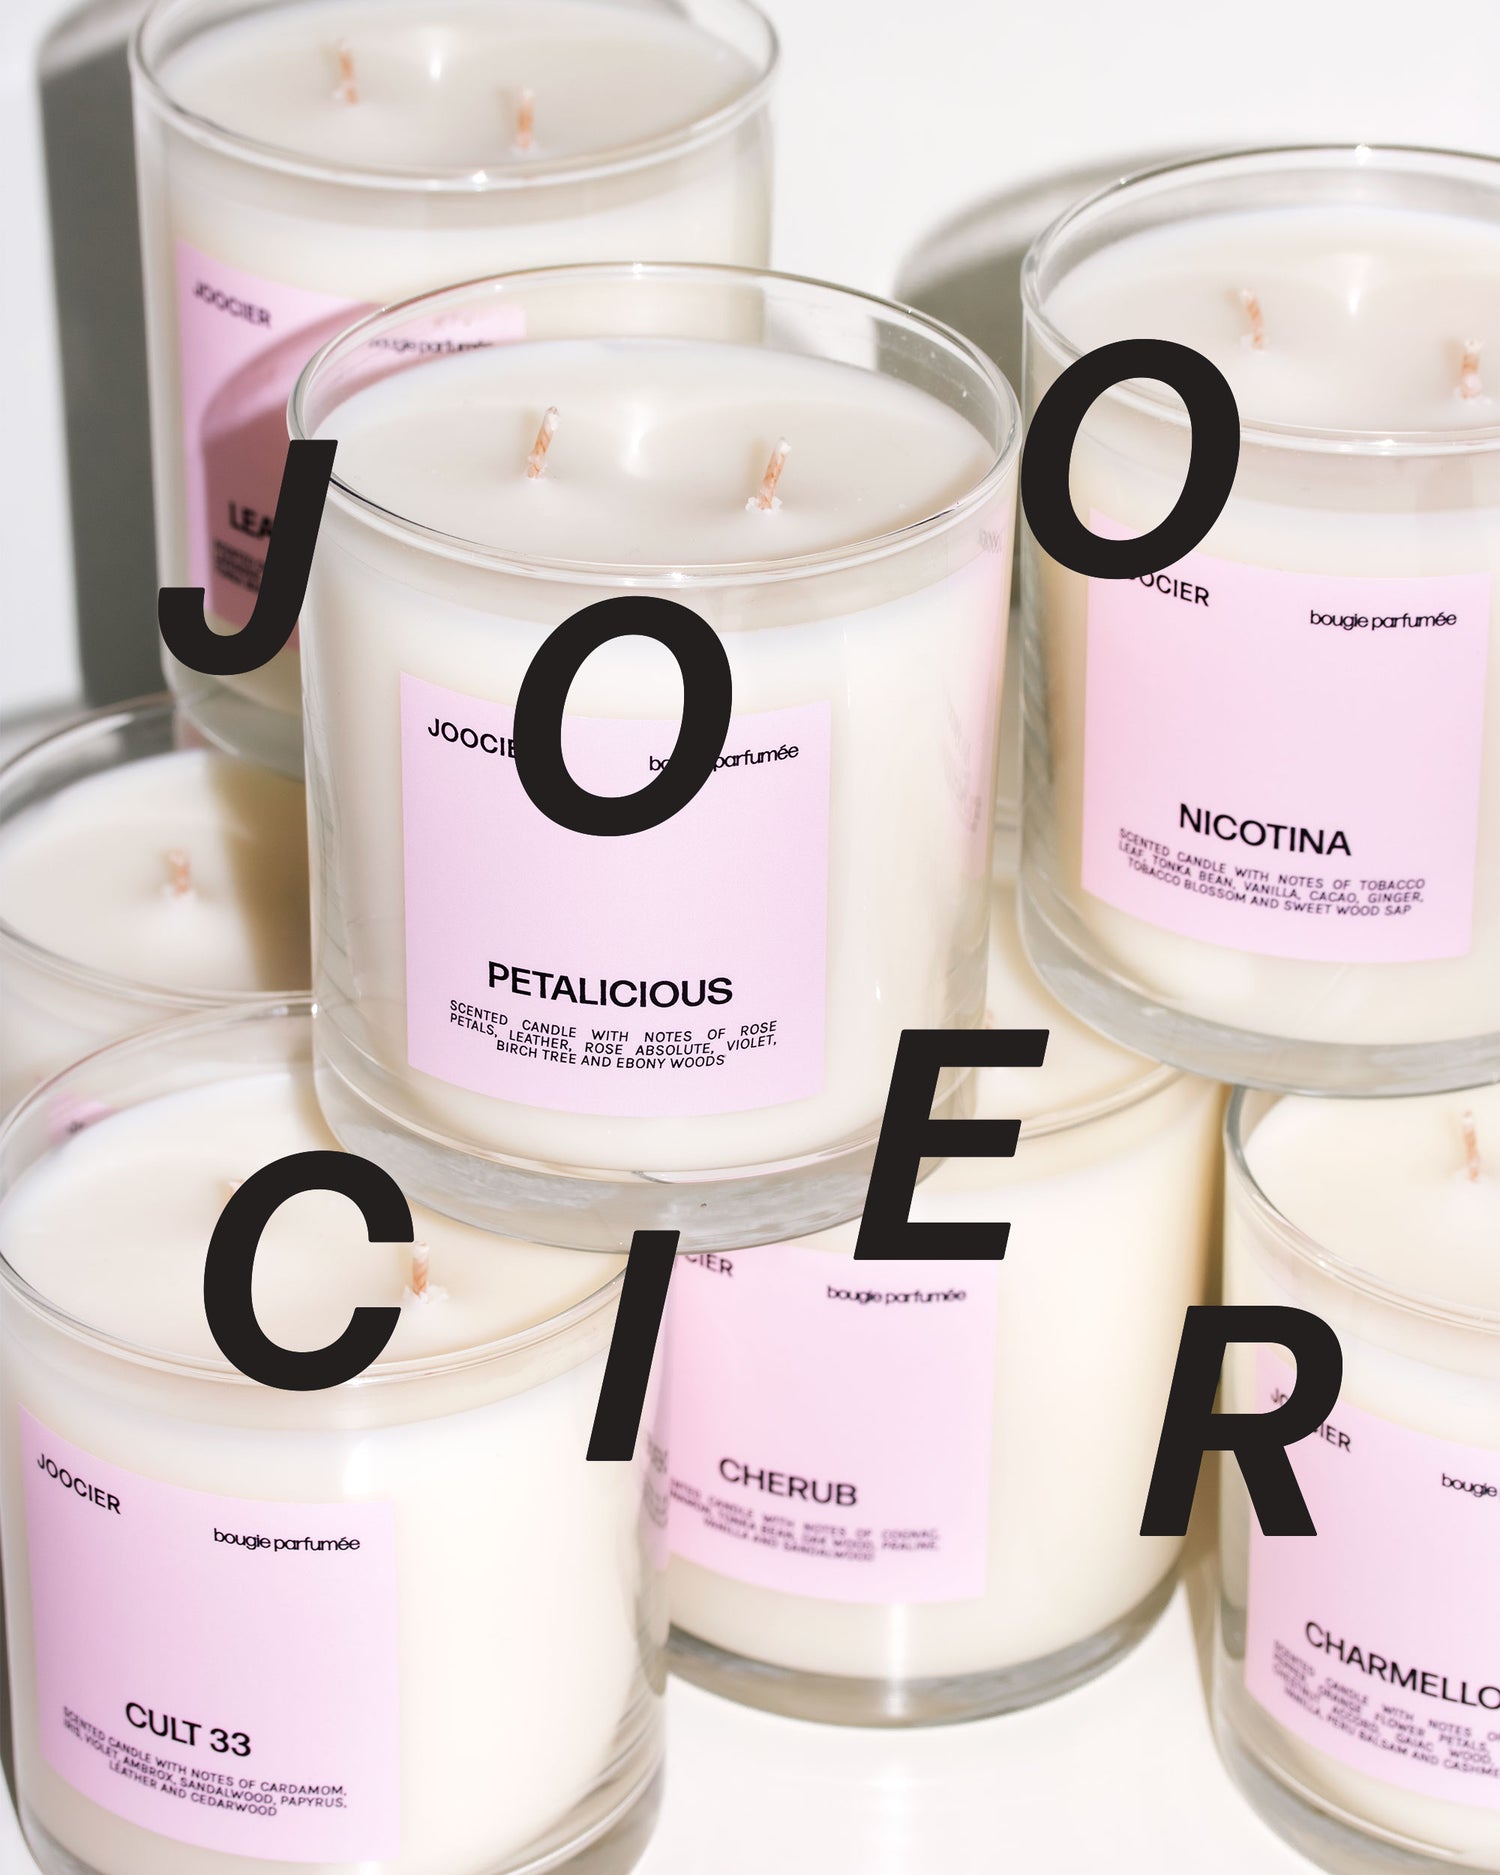 SHOP ALL CANDLES